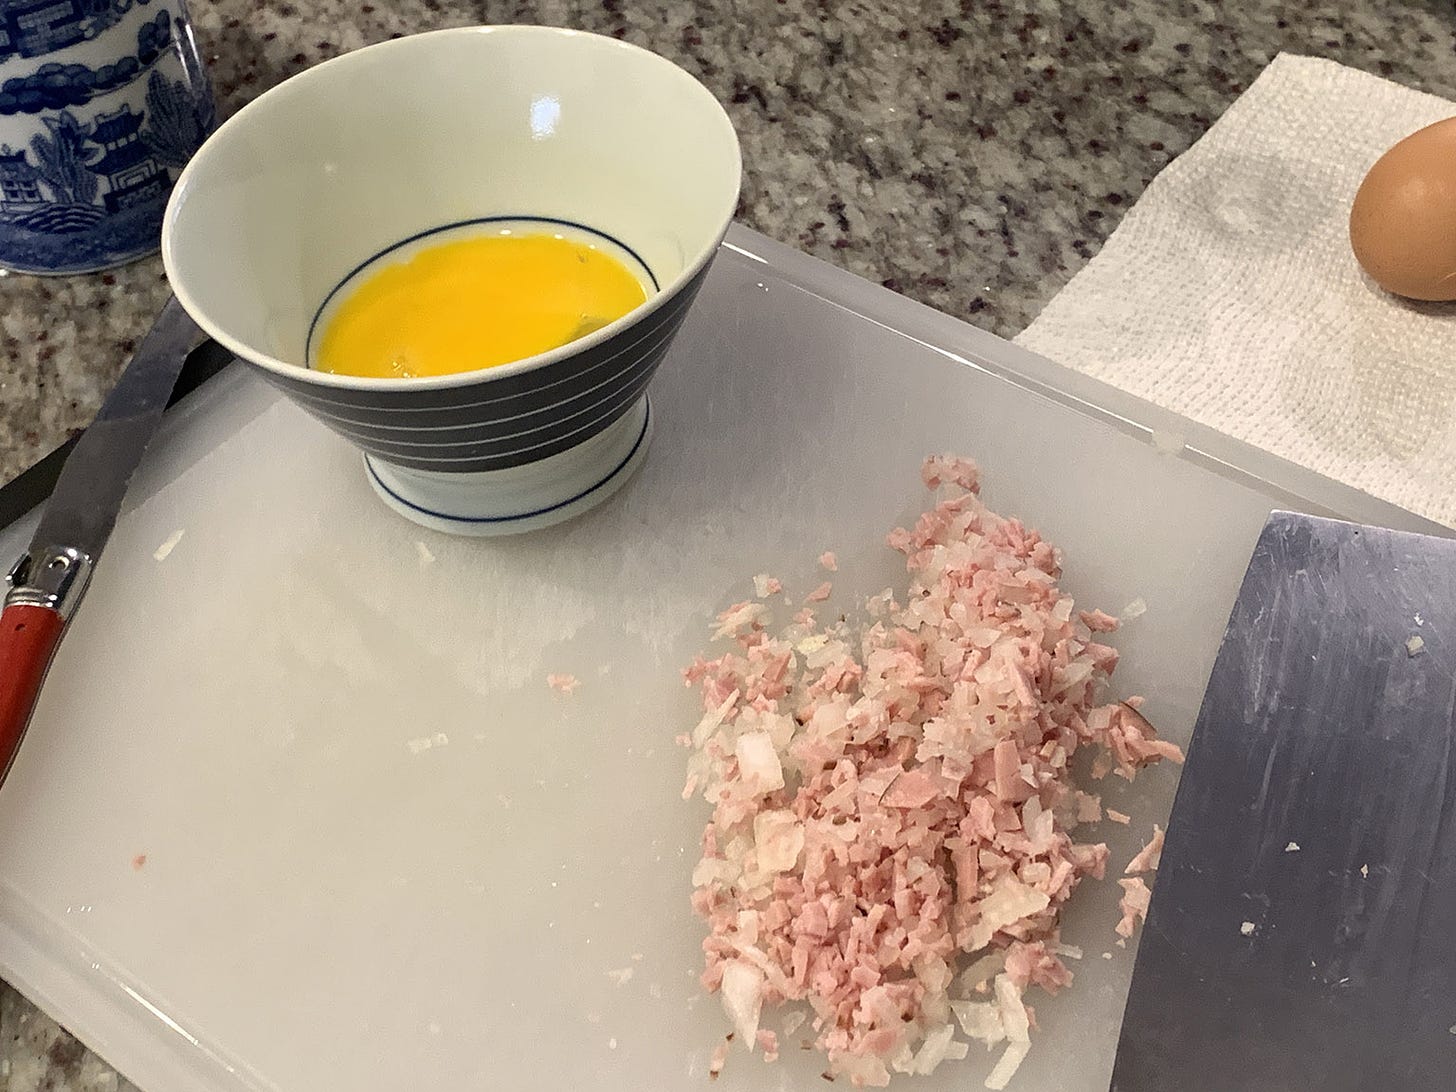 A bowl with a broken egg in it and some chopped ham on a cutting board